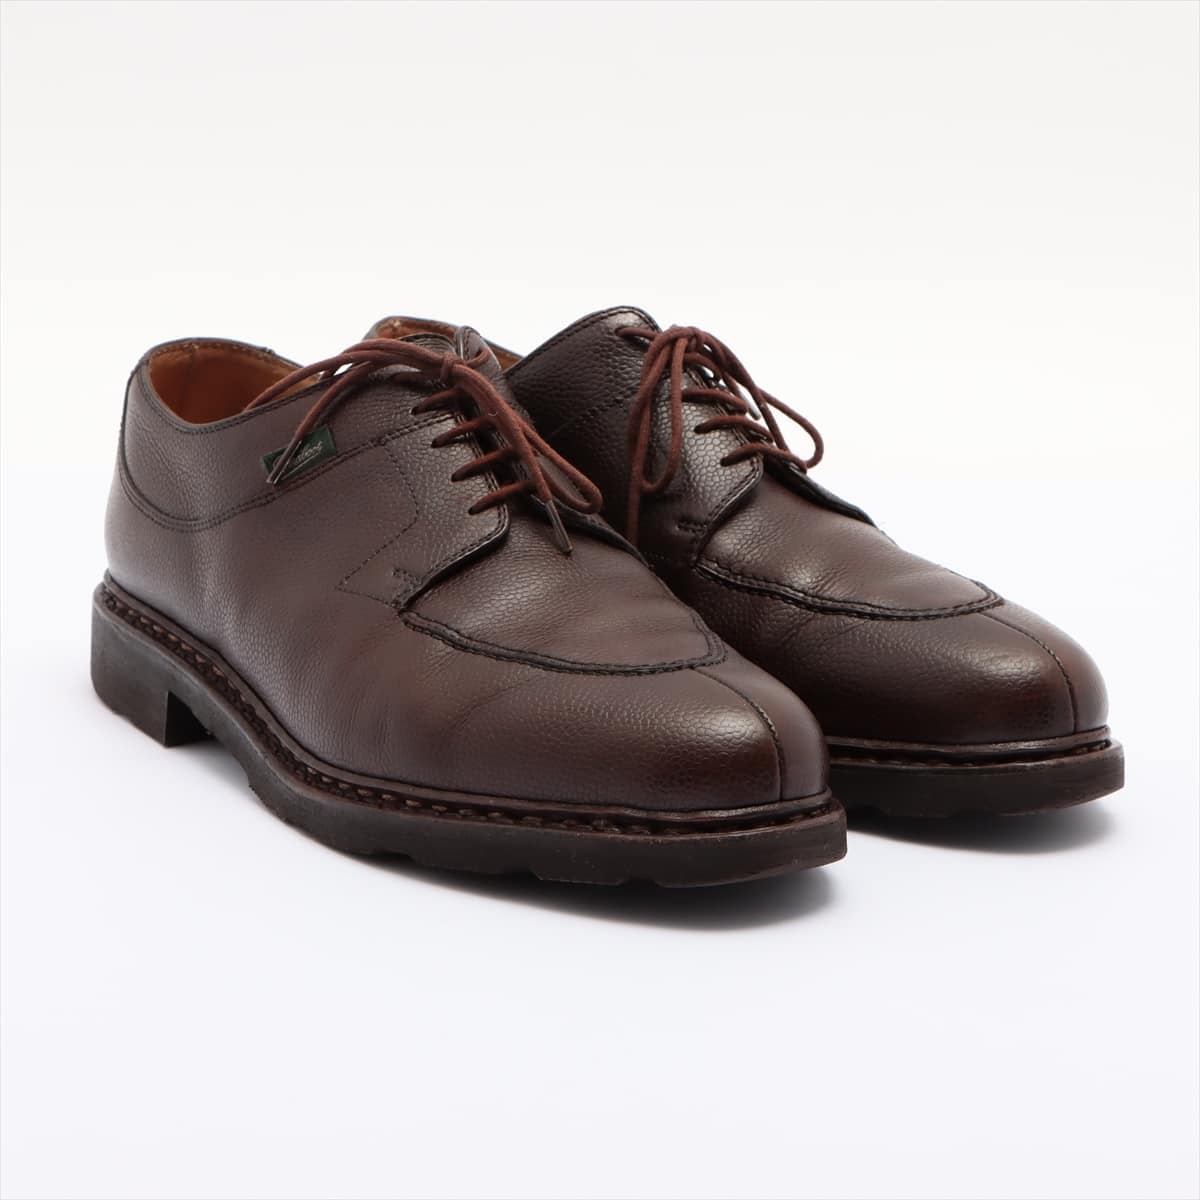 Paraboot Leather Leather shoes 8 Men's Brown